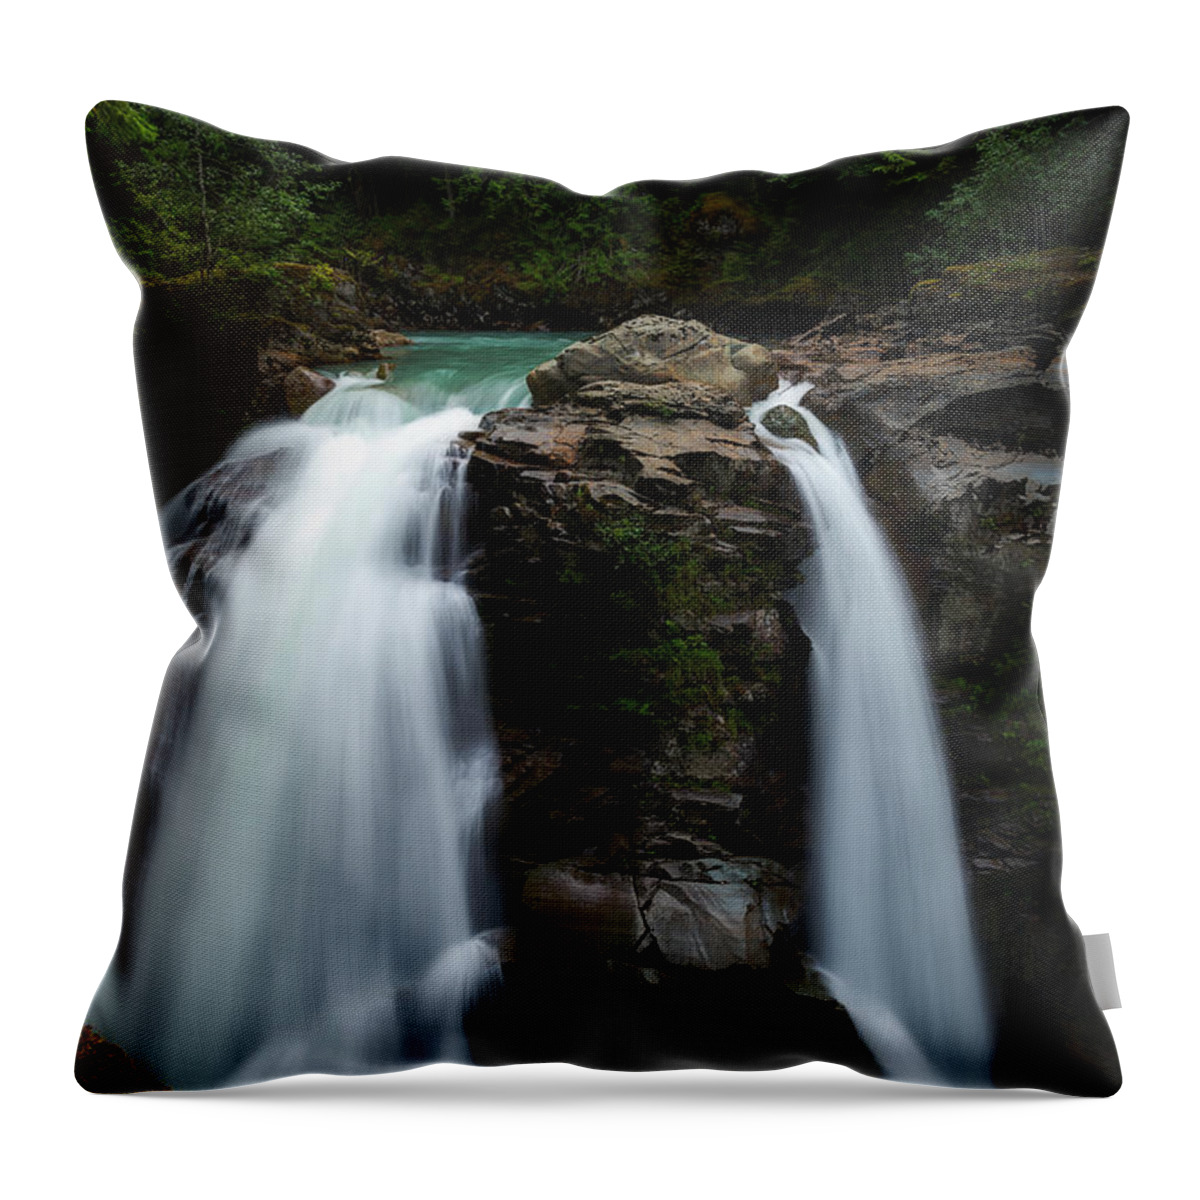 Nooksack Throw Pillow featuring the photograph Nooksack Falls by Ryan Manuel